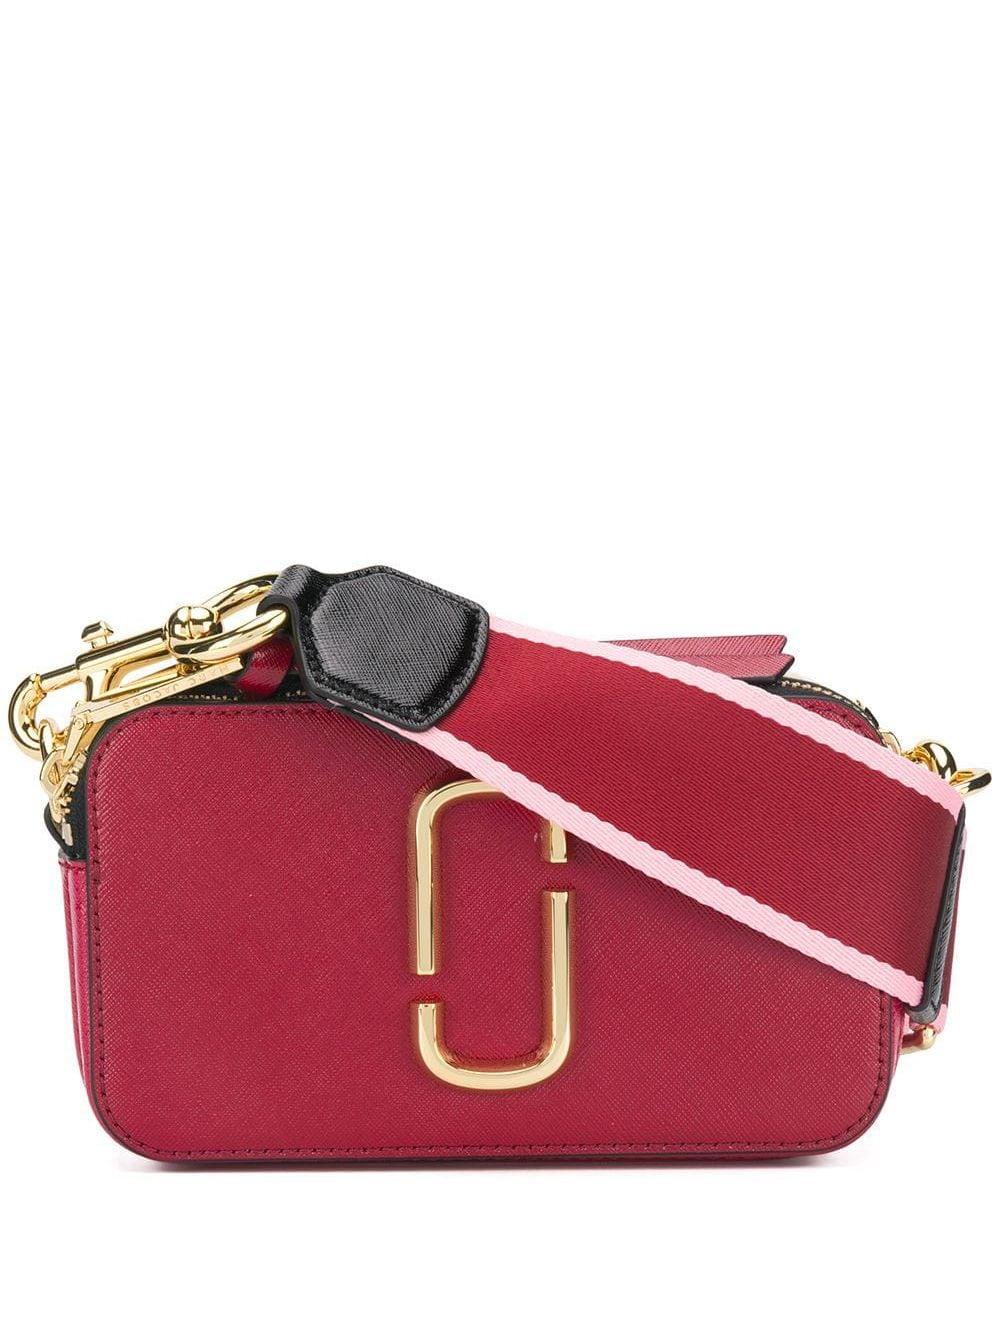 Marc Jacobs Leather The Snapshot Camera Bag in Red - Save 18% - Lyst